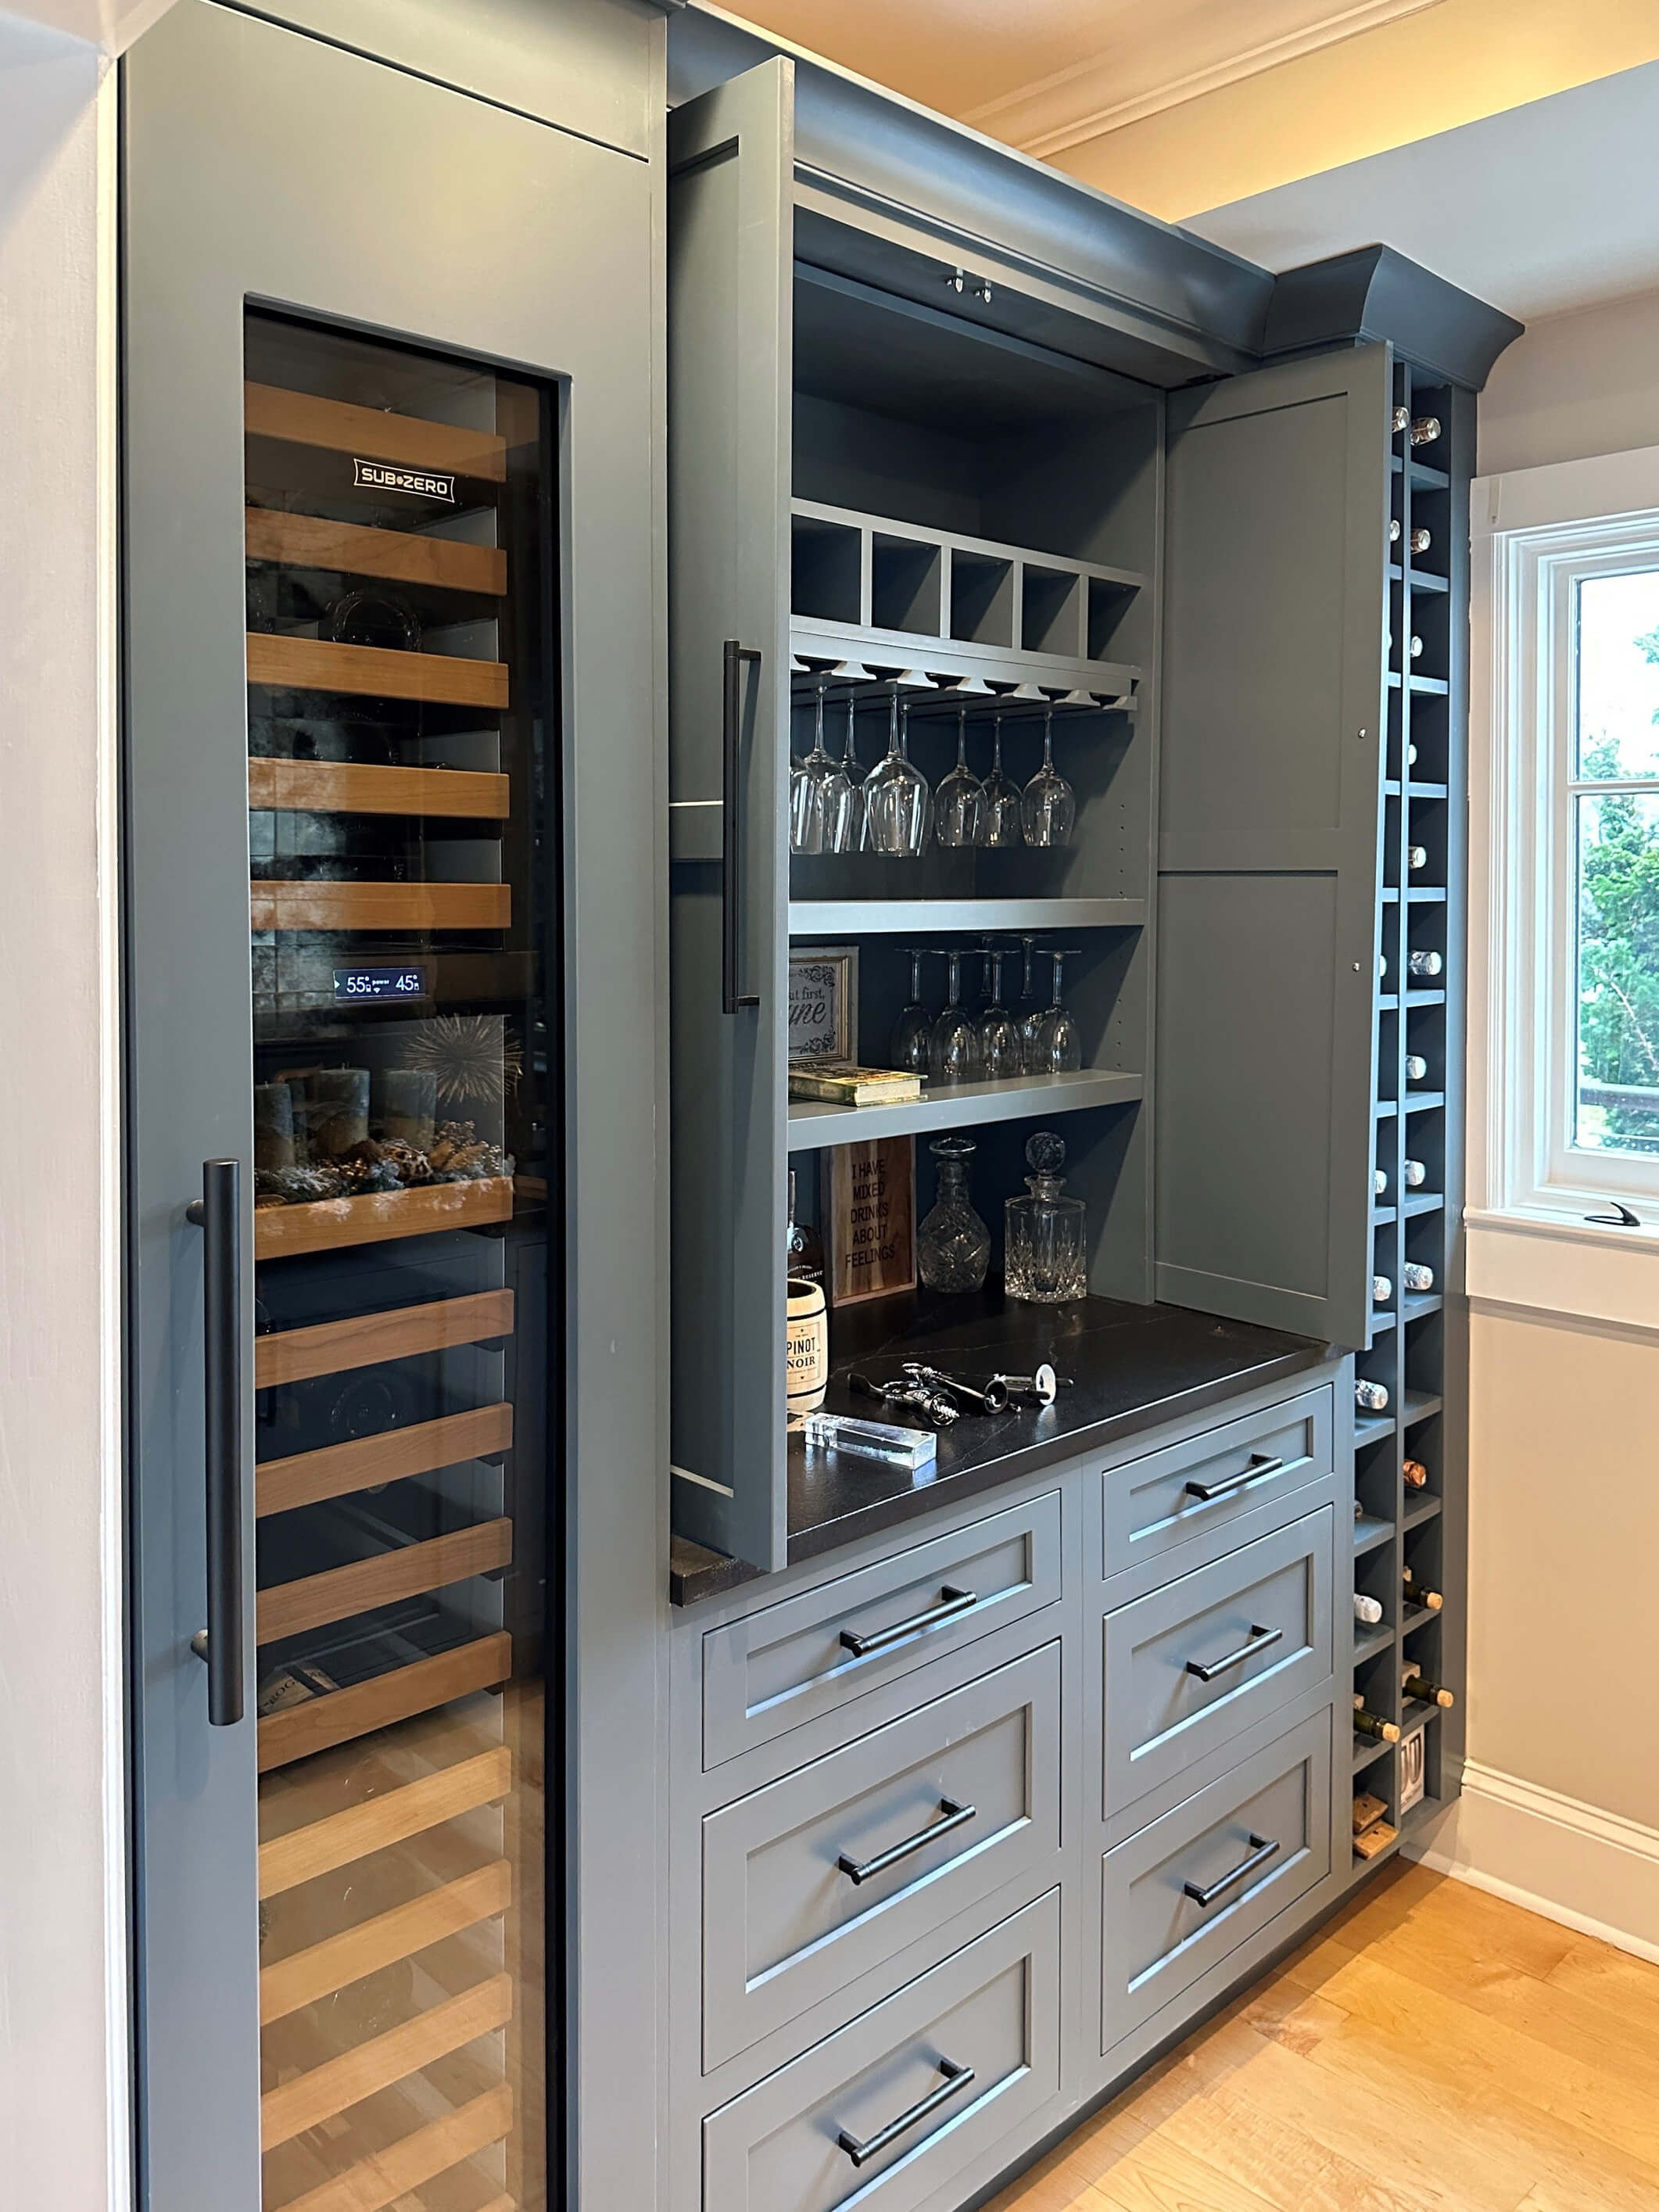 A full wall home bar and larder cabinet for a hidden beverage making work station.